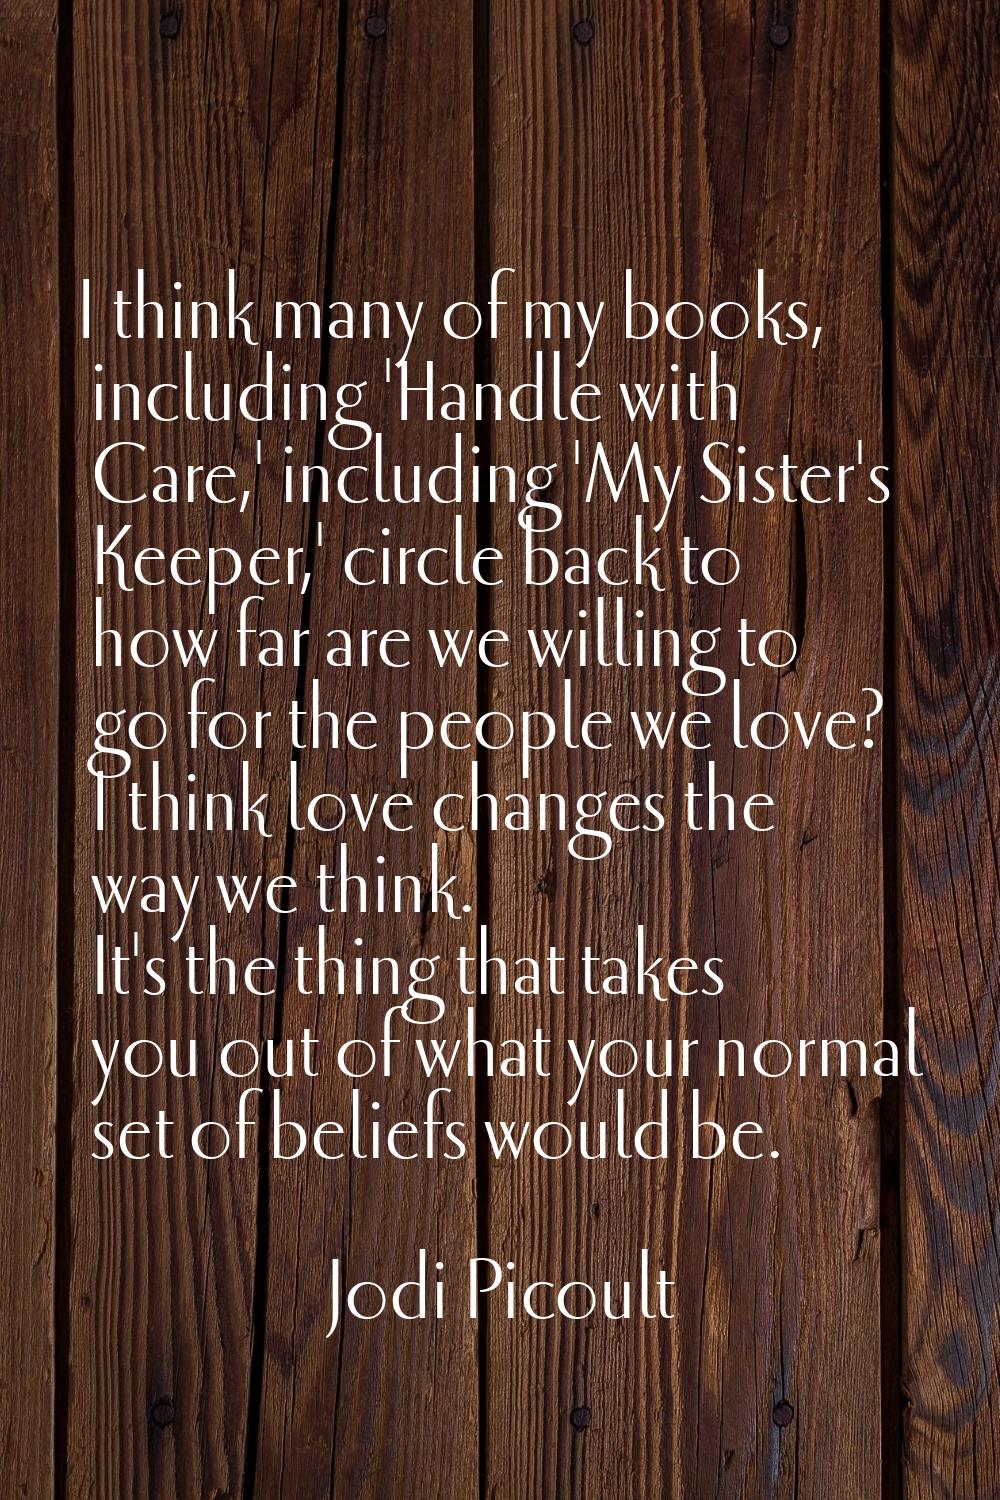 I think many of my books, including 'Handle with Care,' including 'My Sister's Keeper,' circle back